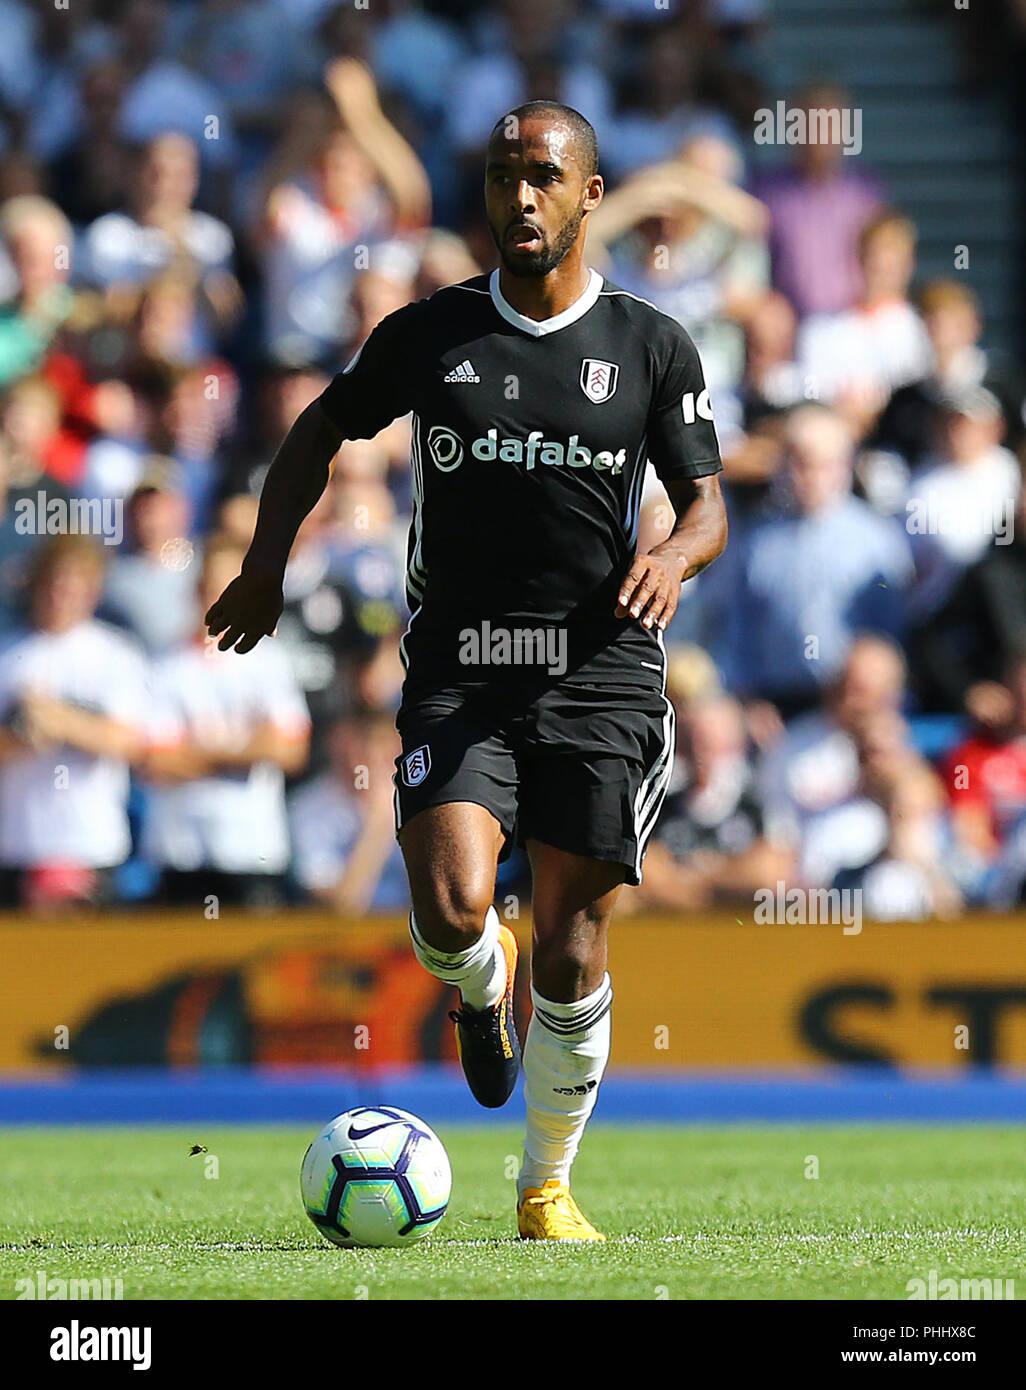 Fulham's Denis Odoi during the Premier League match at the AMEX Stadium, Brighton. PRESS ASSOCIATION Photo. Picture date: Saturday September 1, 2018. See PA story SOCCER Brighton. Photo credit should read: Gareth Fuller/PA Wire. RESTRICTIONS: No use with unauthorised audio, video, data, fixture lists, club/league logos or 'live' services. Online in-match use limited to 120 images, no video emulation. No use in betting, games or single club/league/player publications. Stock Photo